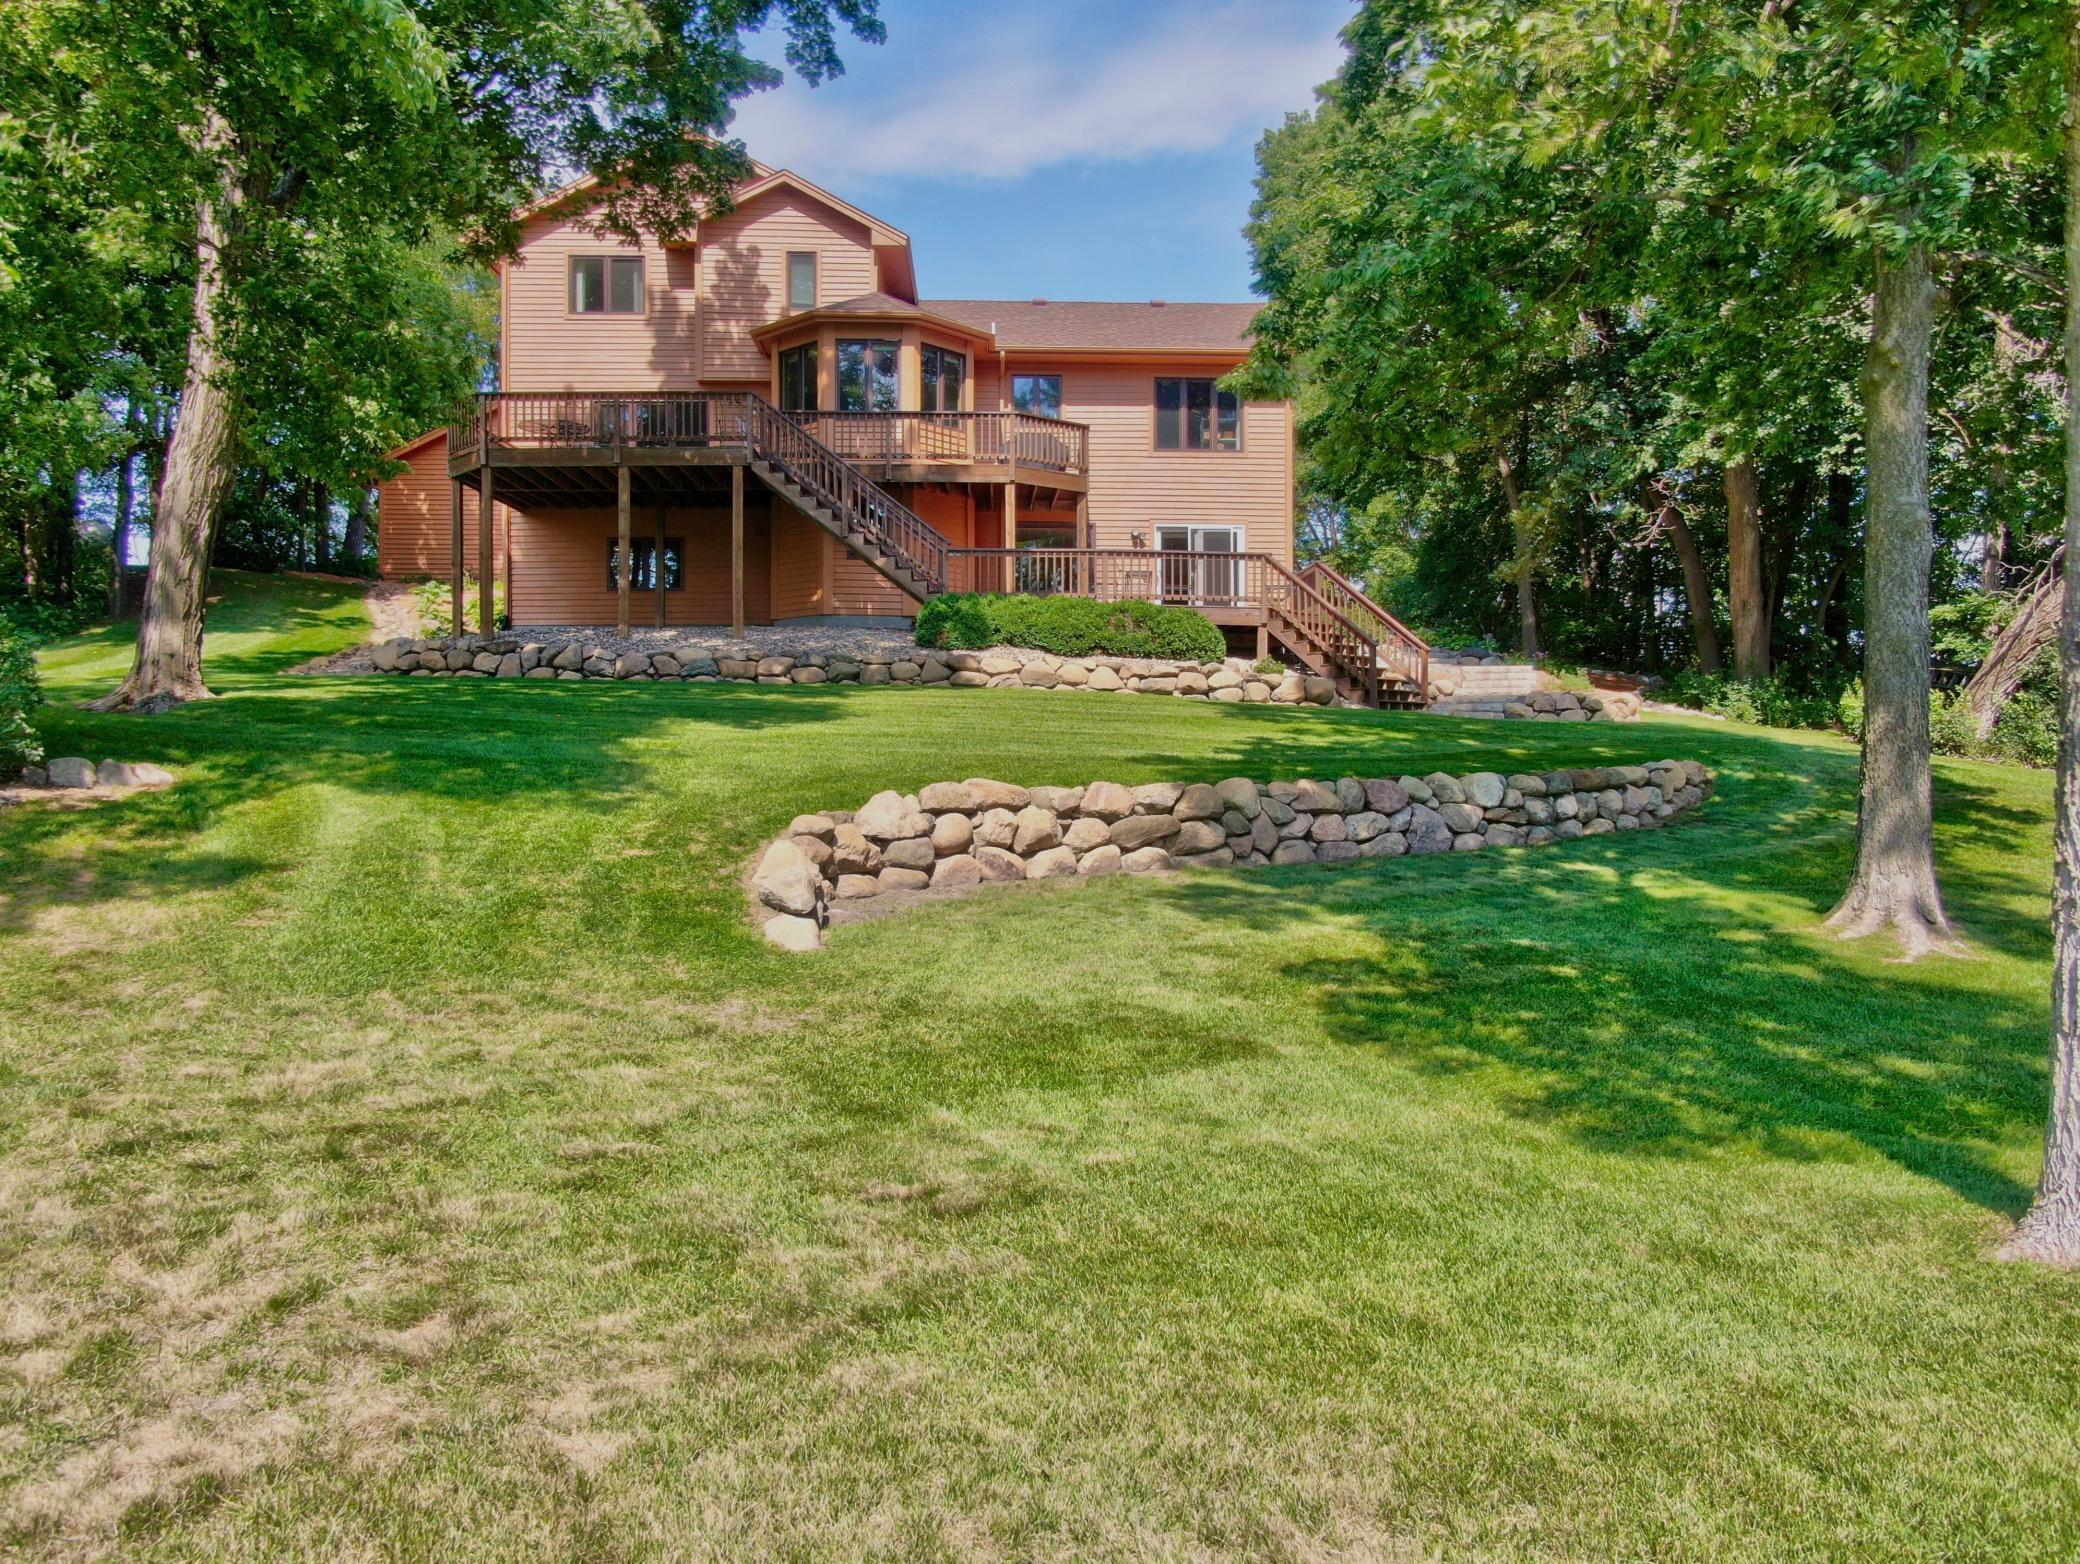 The extensive boulder landscaping accents this property perfectly! With an easy to mow lawn you hardly need to even get off your riding mower!